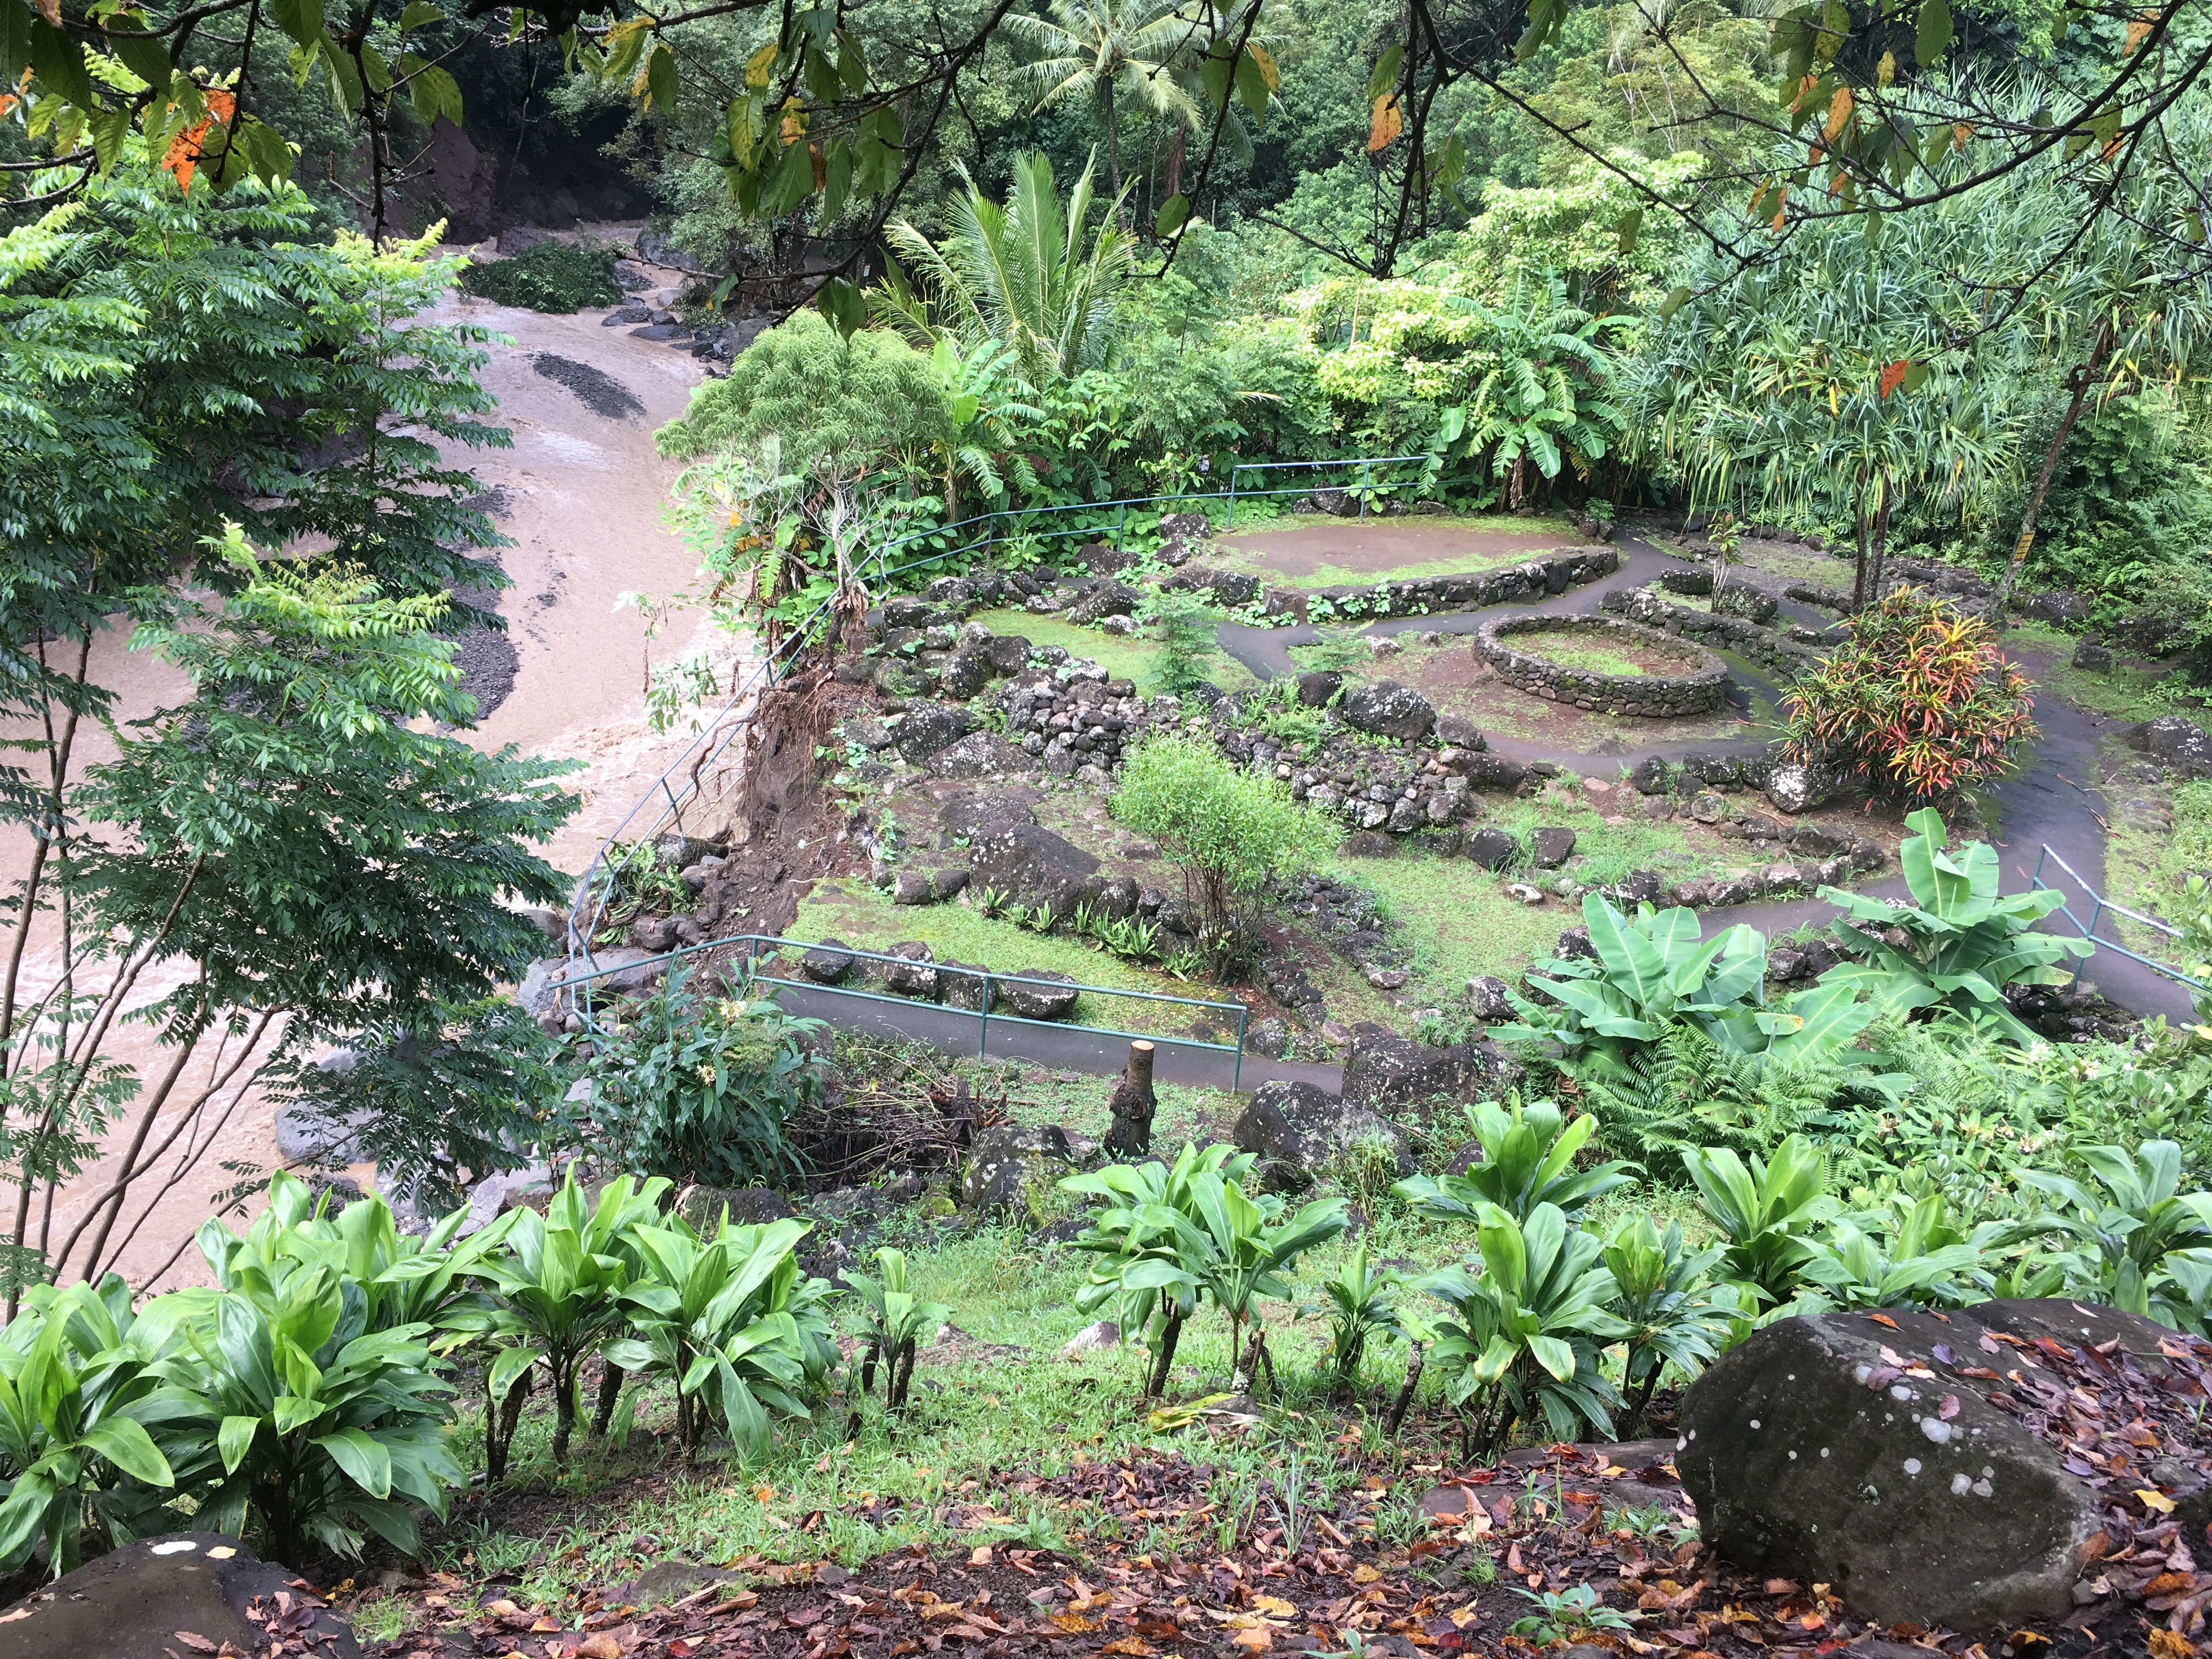 Iao Valley Monument Closed